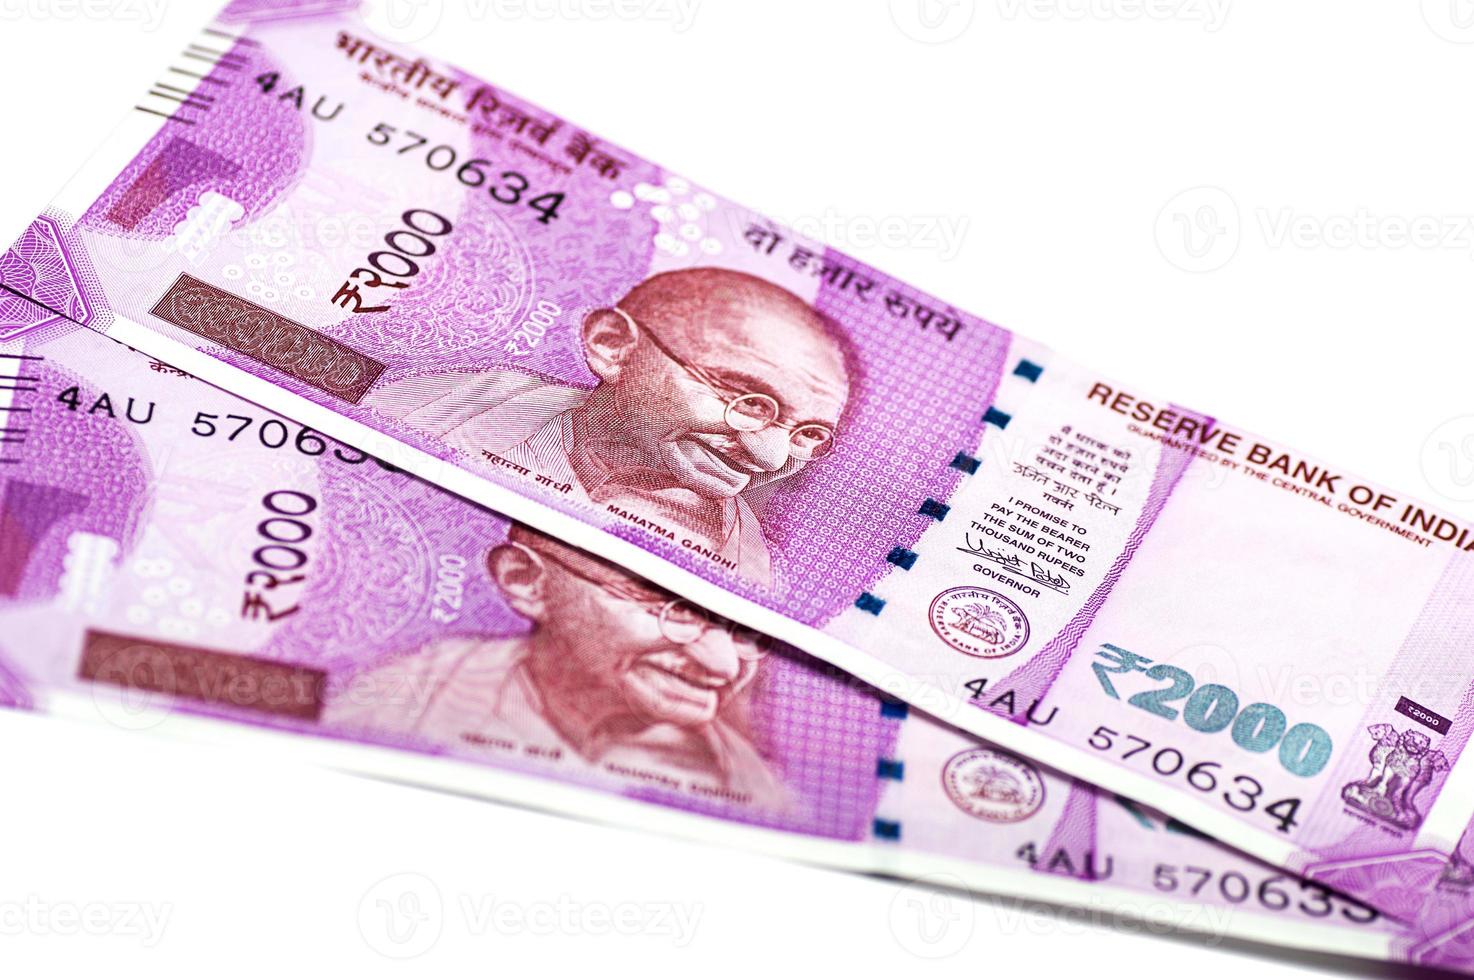 New Indian Currency of Rs 2000 isolated on white background. Published on 9 November 2016. photo